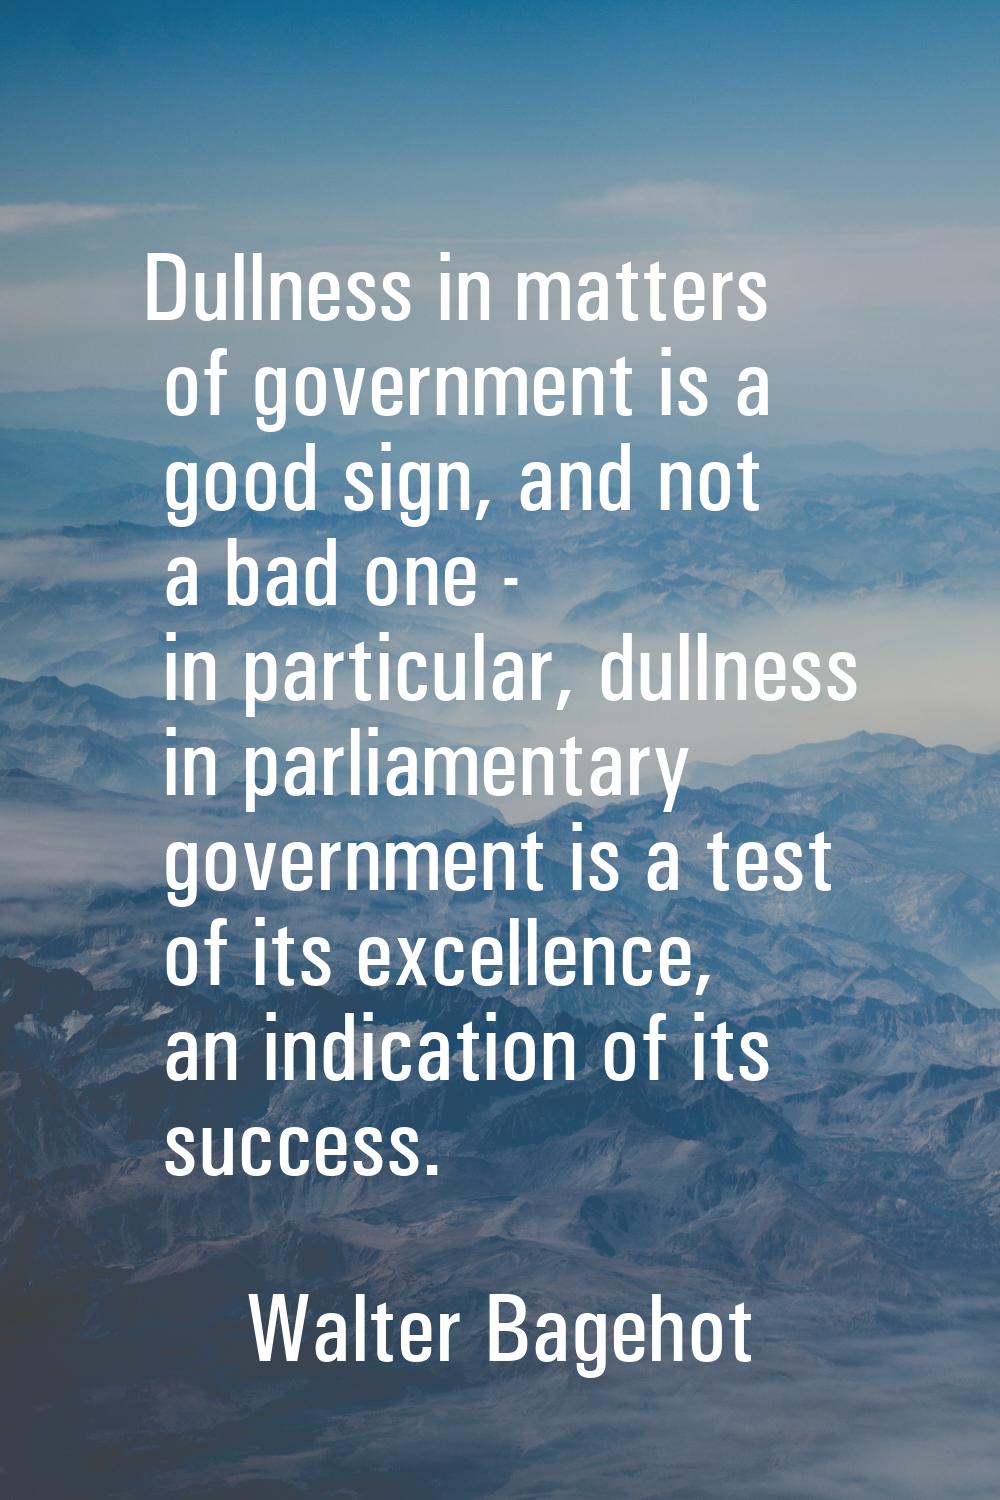 Dullness in matters of government is a good sign, and not a bad one - in particular, dullness in pa